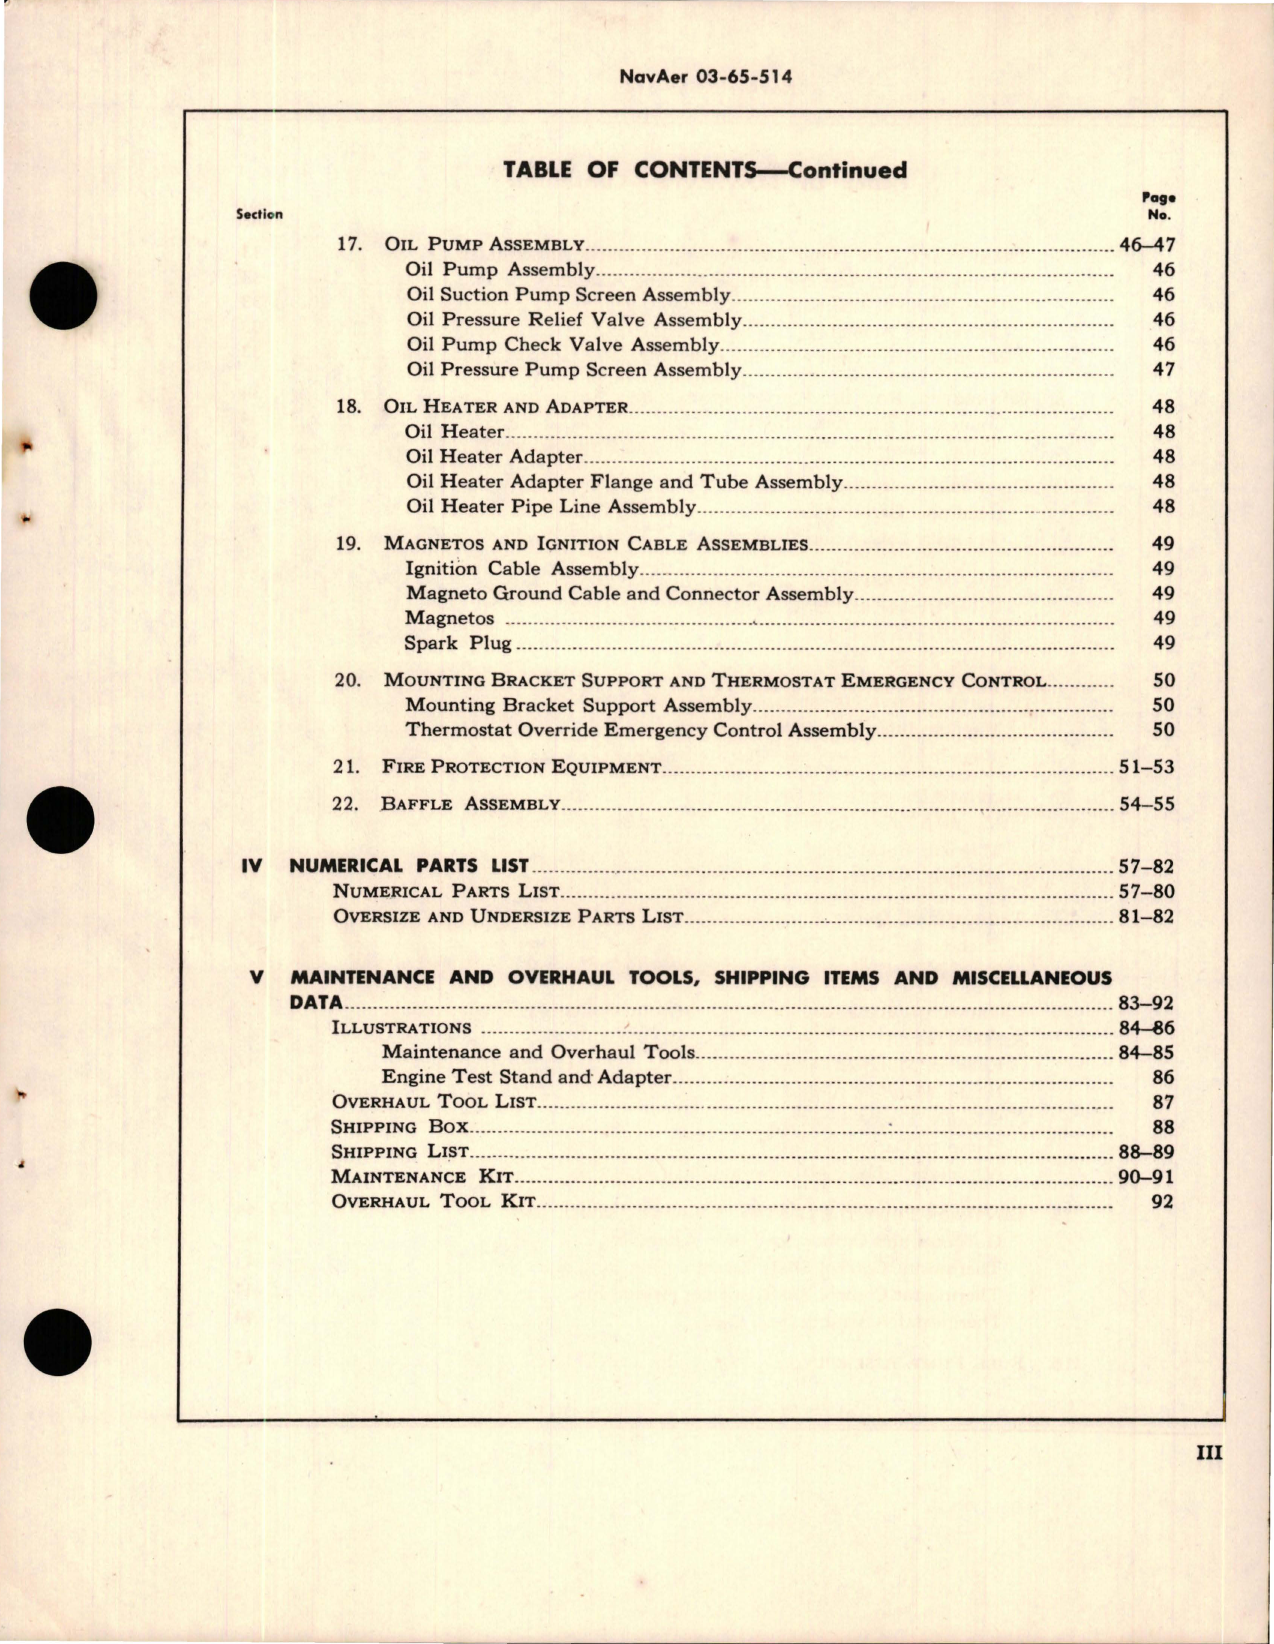 Sample page 5 from AirCorps Library document: Parts Catalog for Auxiliary Power Plant - Type 1-A - Model 30D